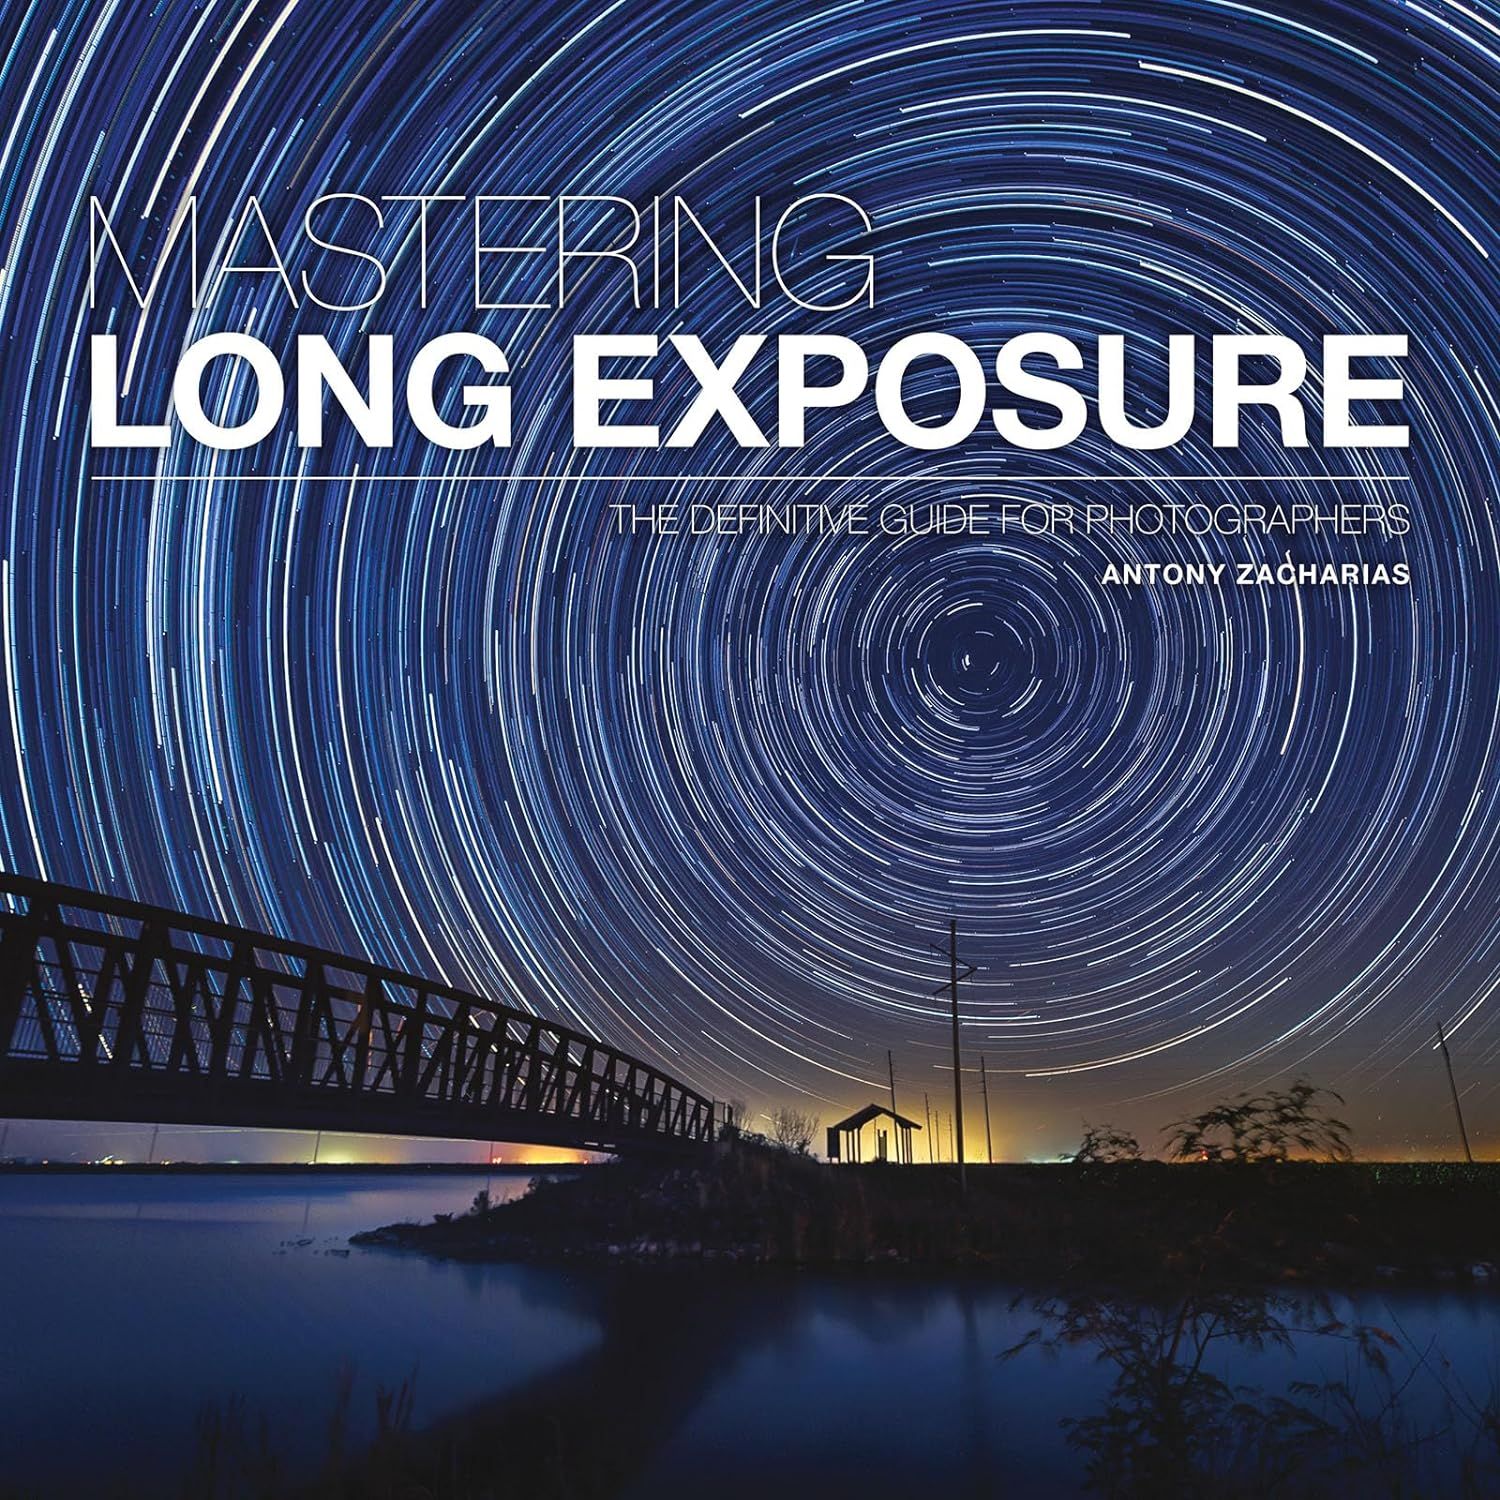  Mastering Long Exposure: The Definitive Guide for Photographers (Mastering) 